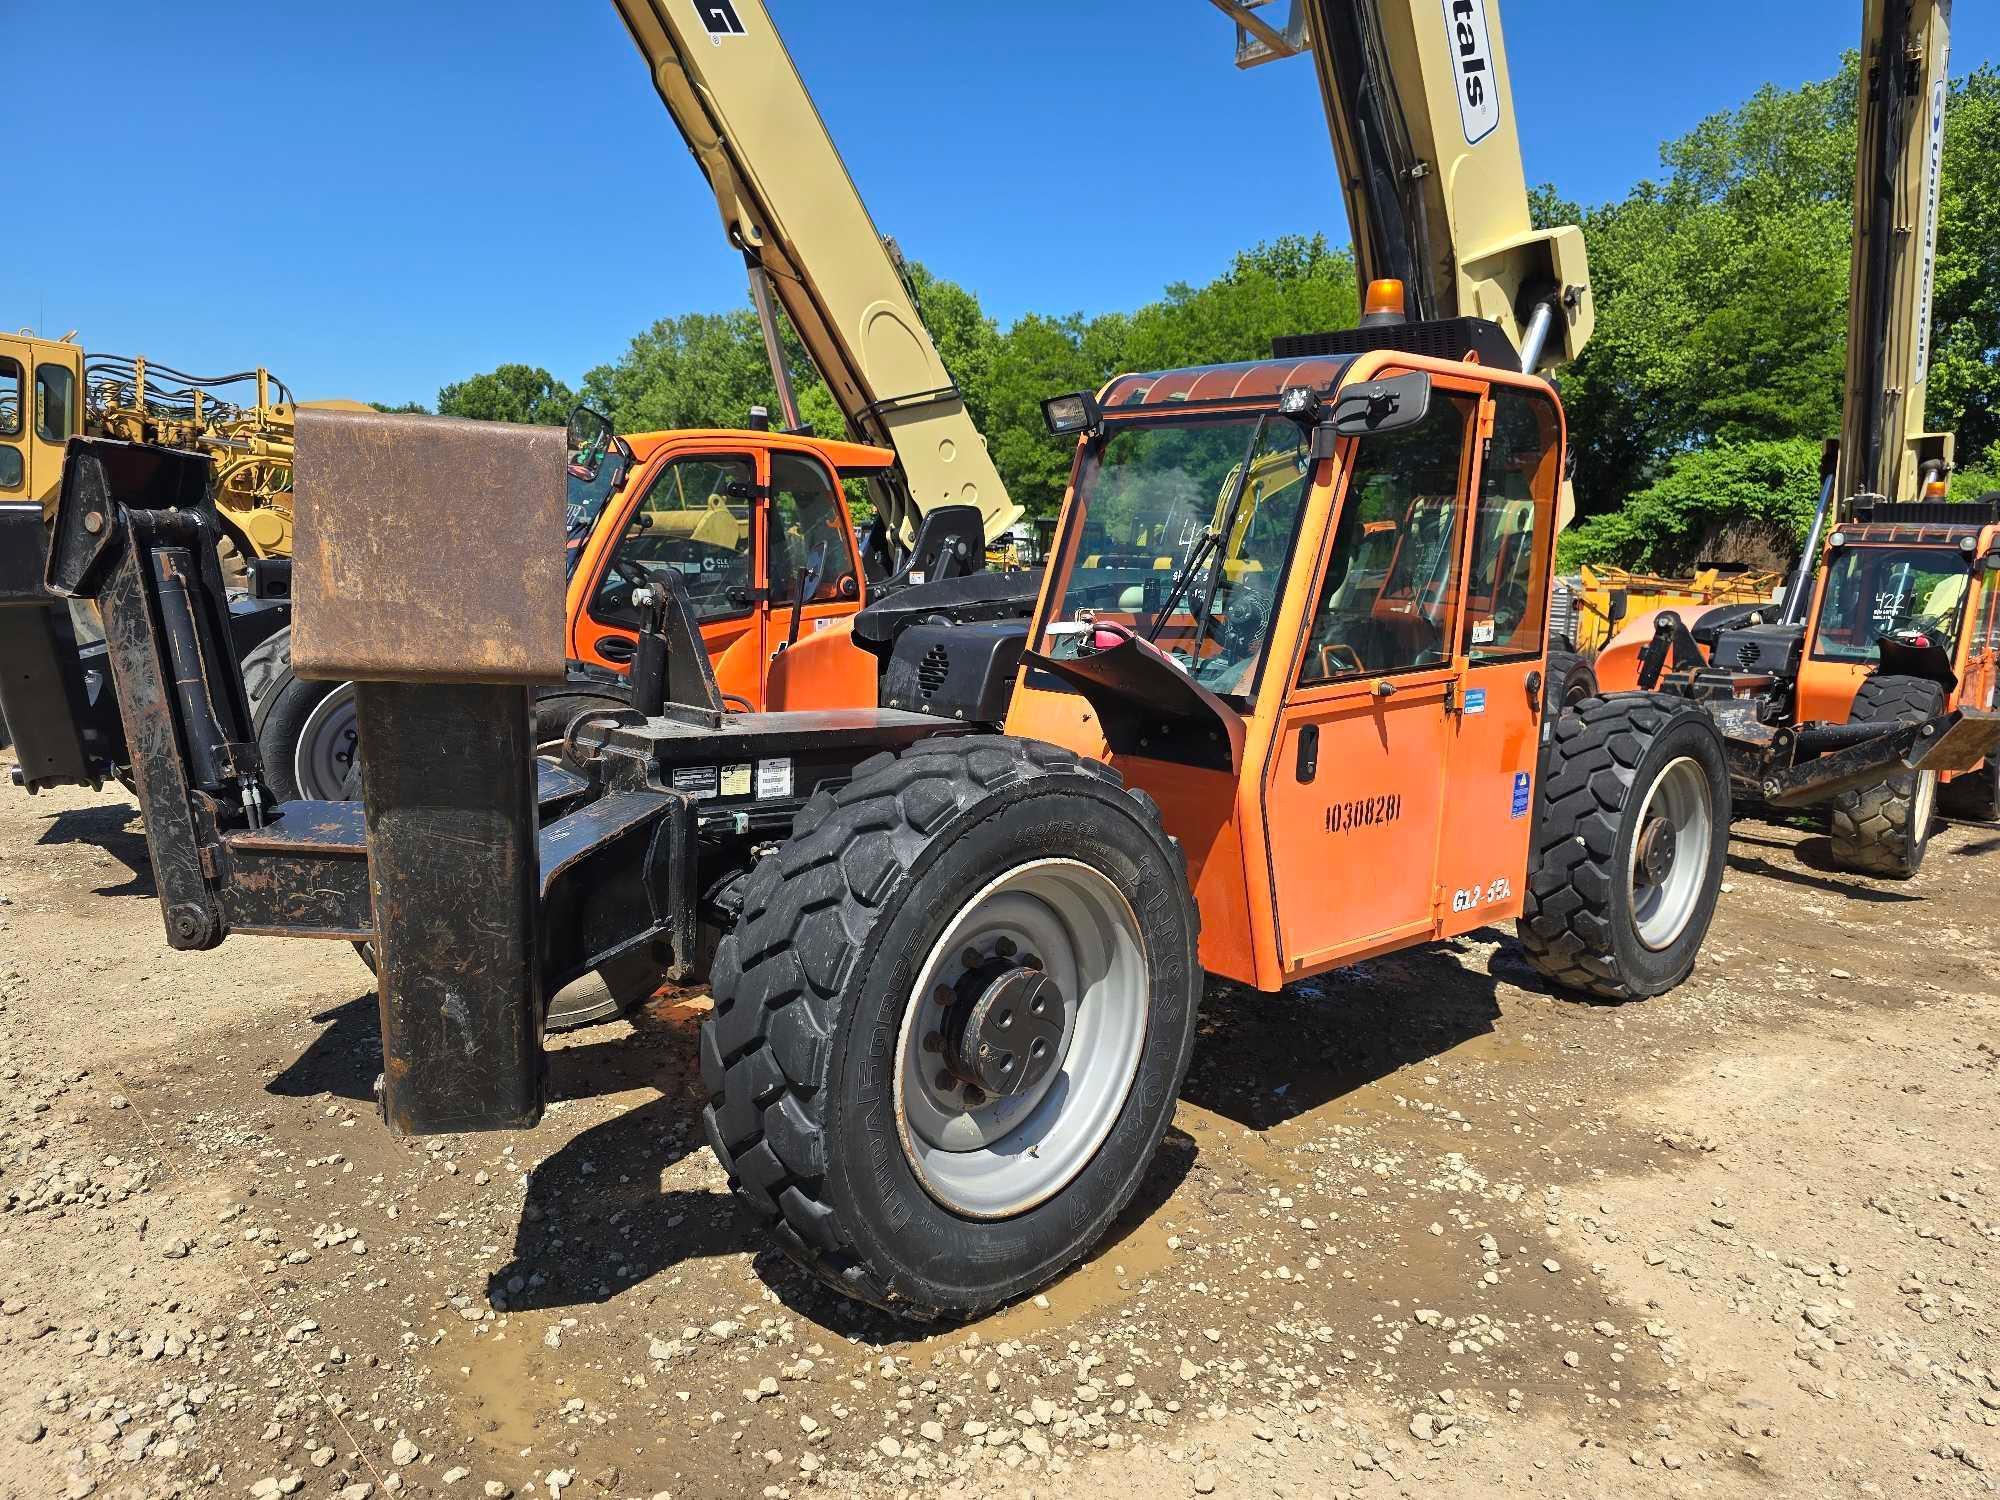 2014 JLG G12-55A TELESCOPIC FORKLIFT SN:160063738 4x4, powered by diesel engine, equipped with